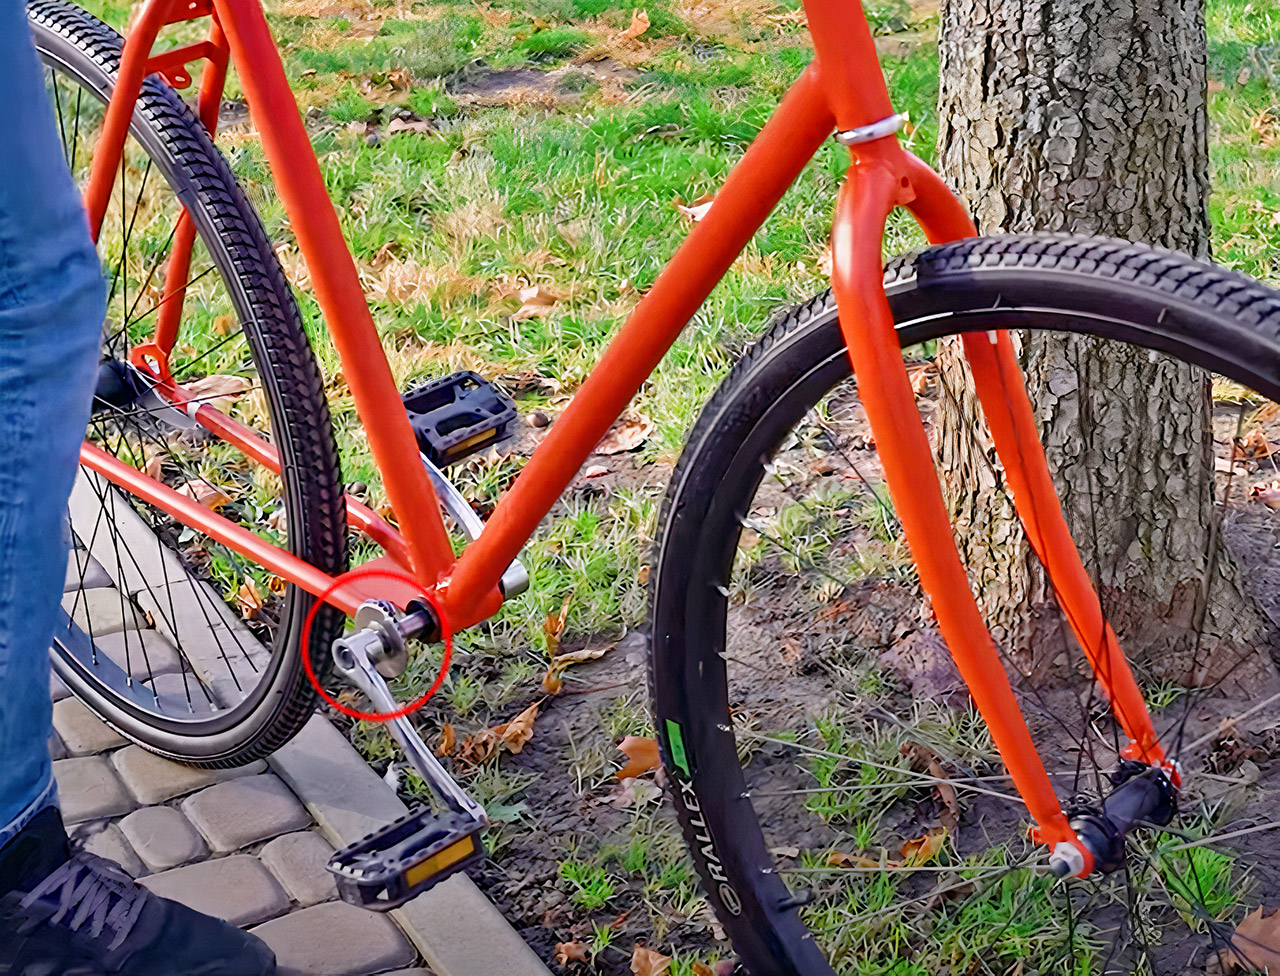 Orange and black chainless bicycle in a garden